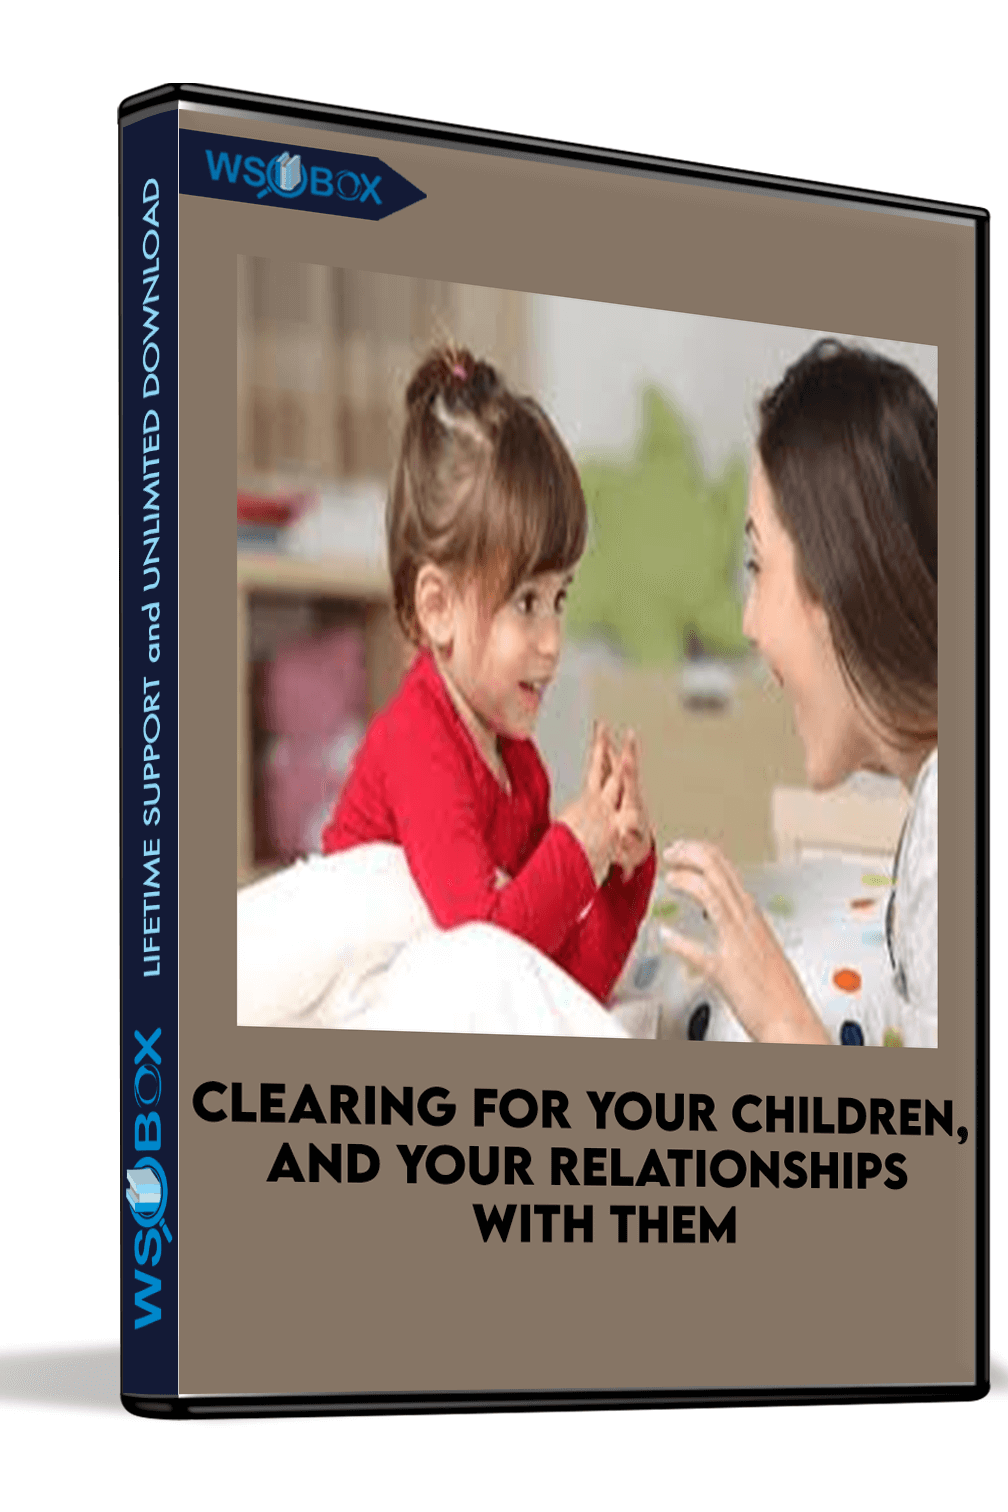 Clearing for your children, and your relationships with them